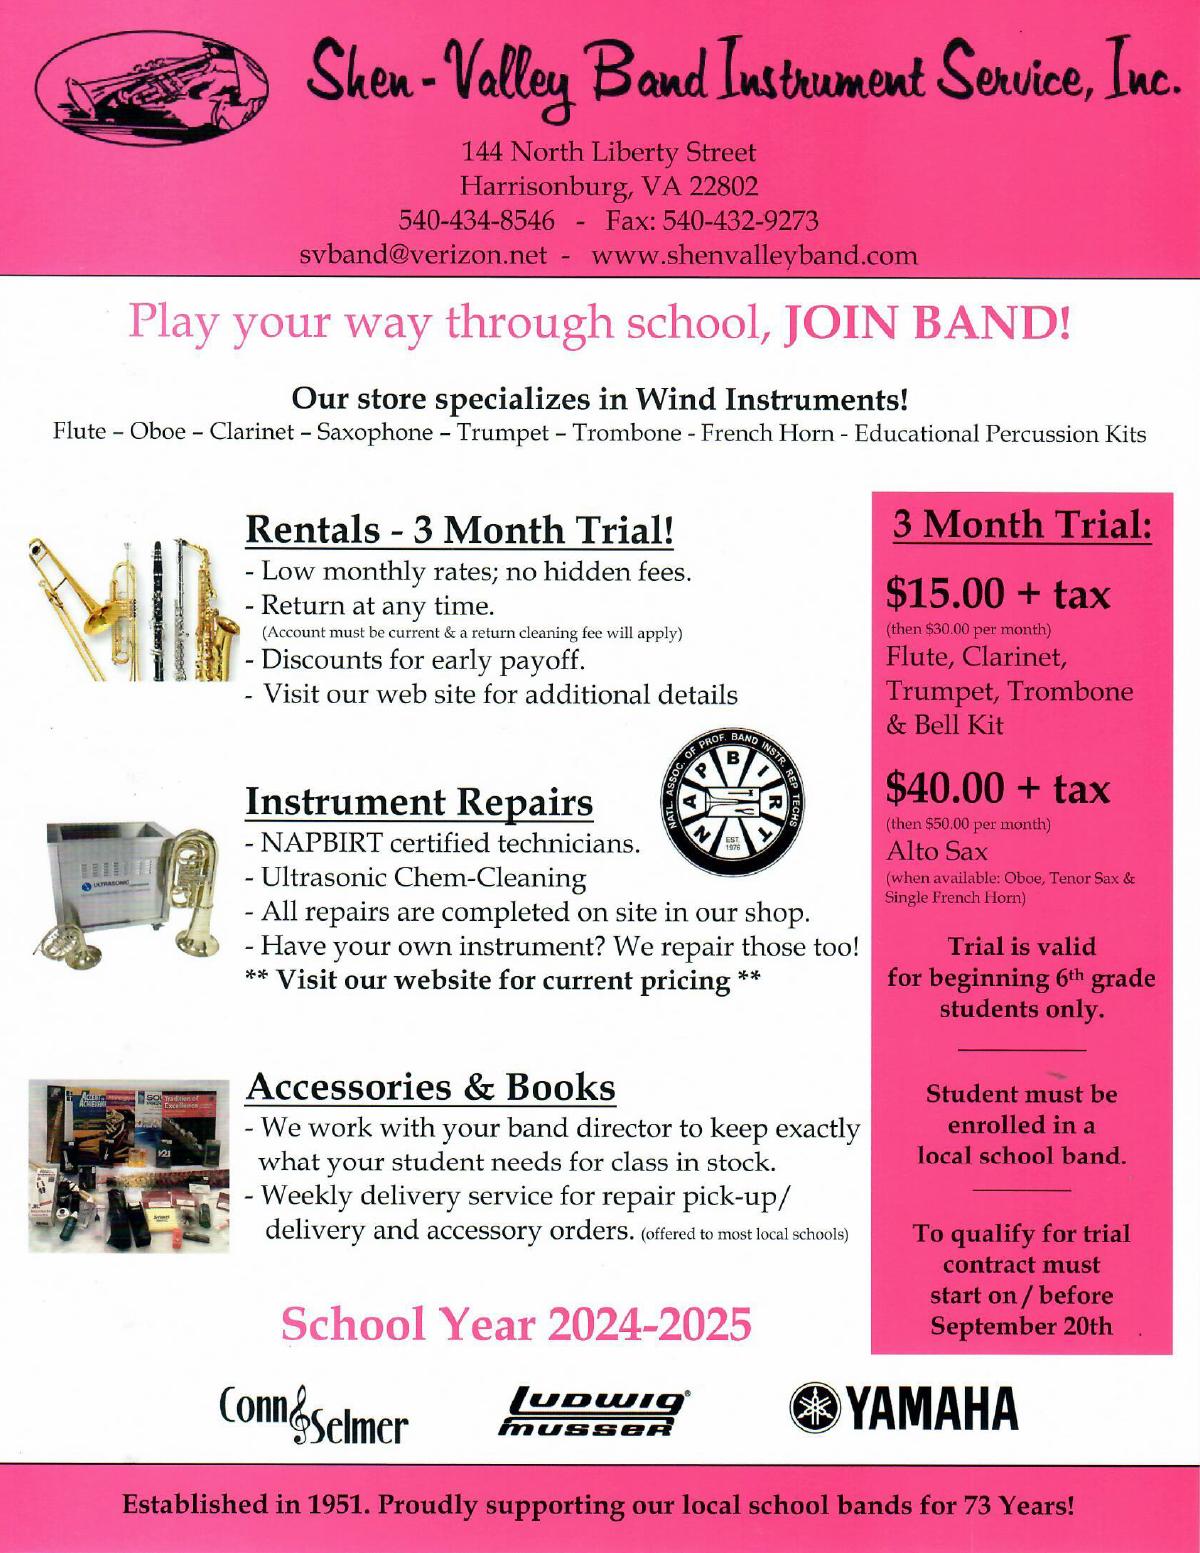 Shen-Valley Band rents musical instruments